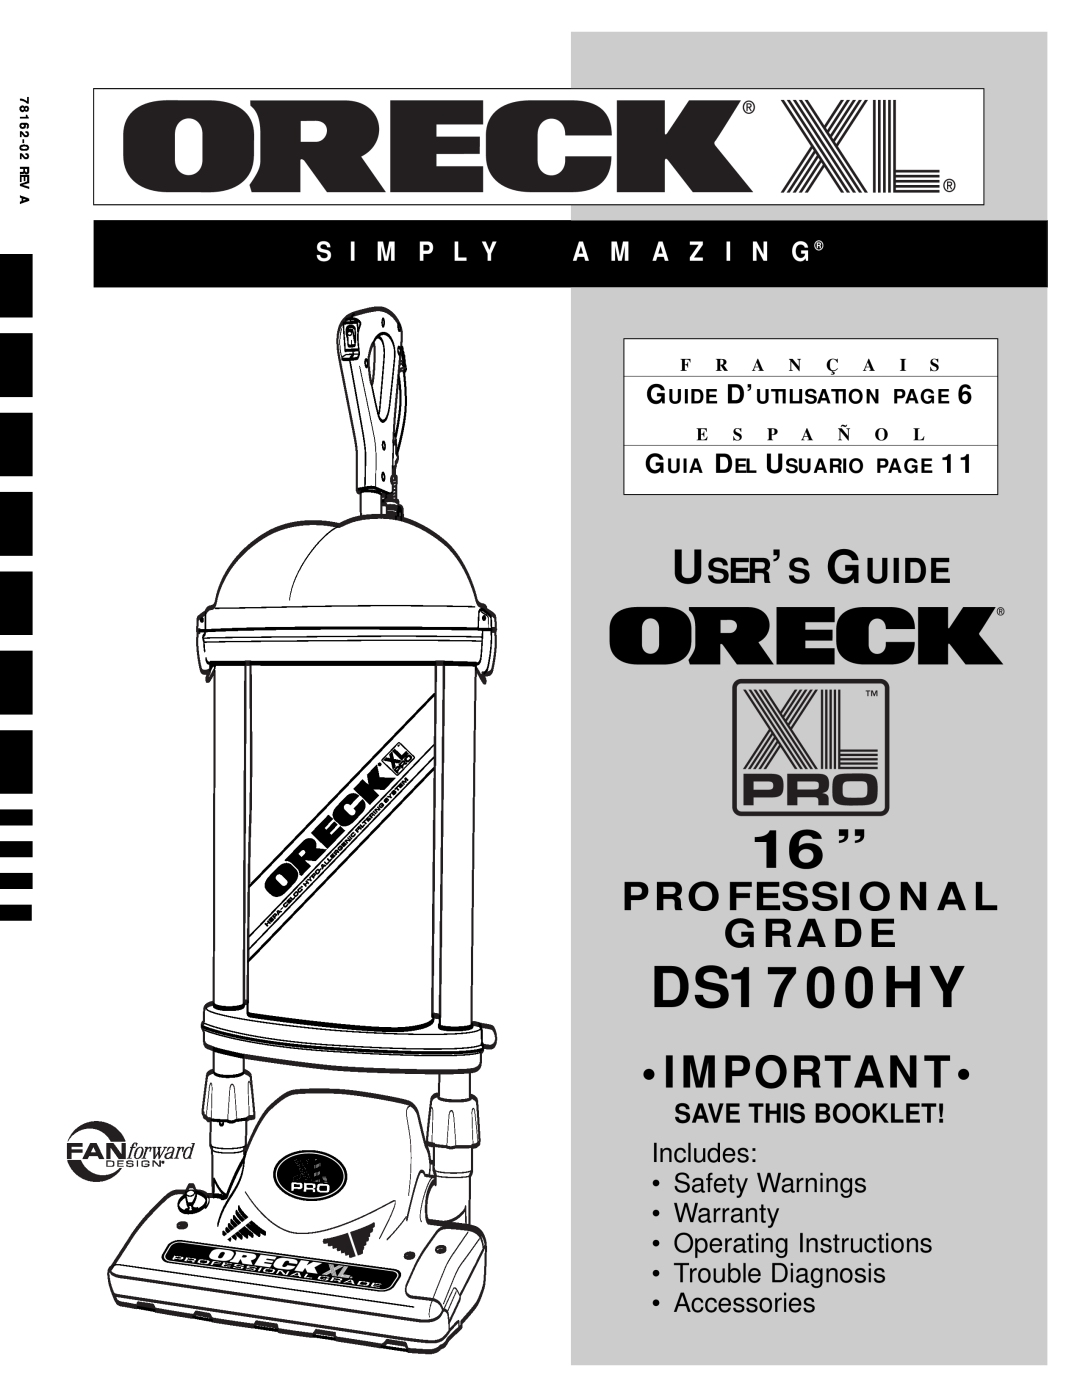 Oreck DS1700HY warranty S I M P L Y, A M A Z I N G, Save This Booklet, Guide D’Utilisation Page, Guia Del Usuario Page 